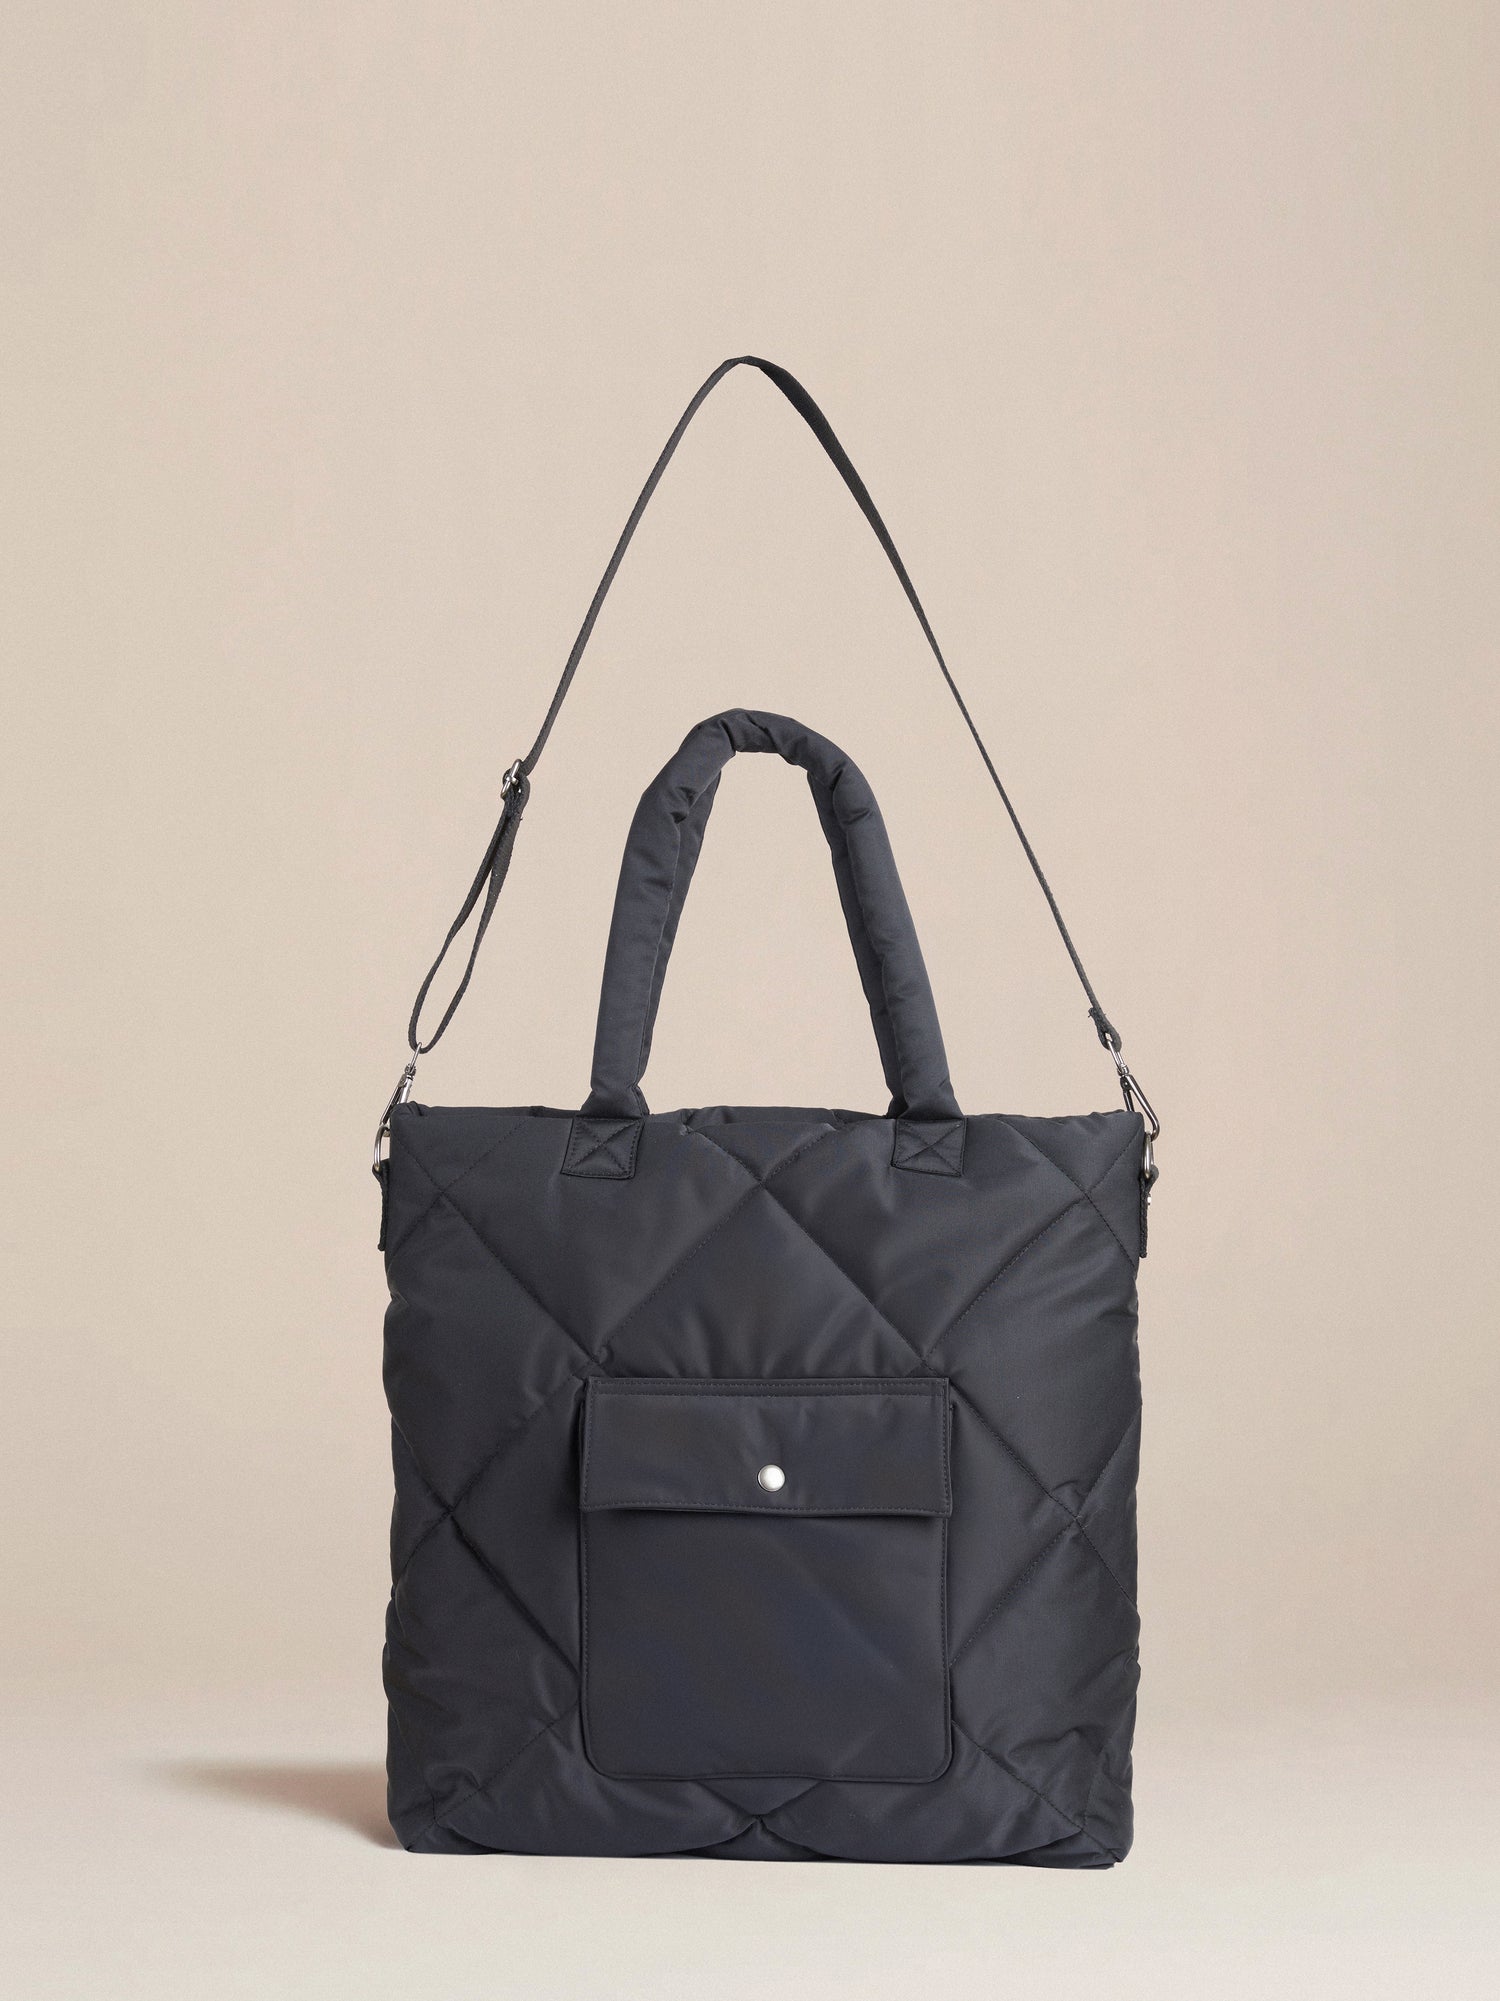 The Dayer Nylon Quilted Bag in black.